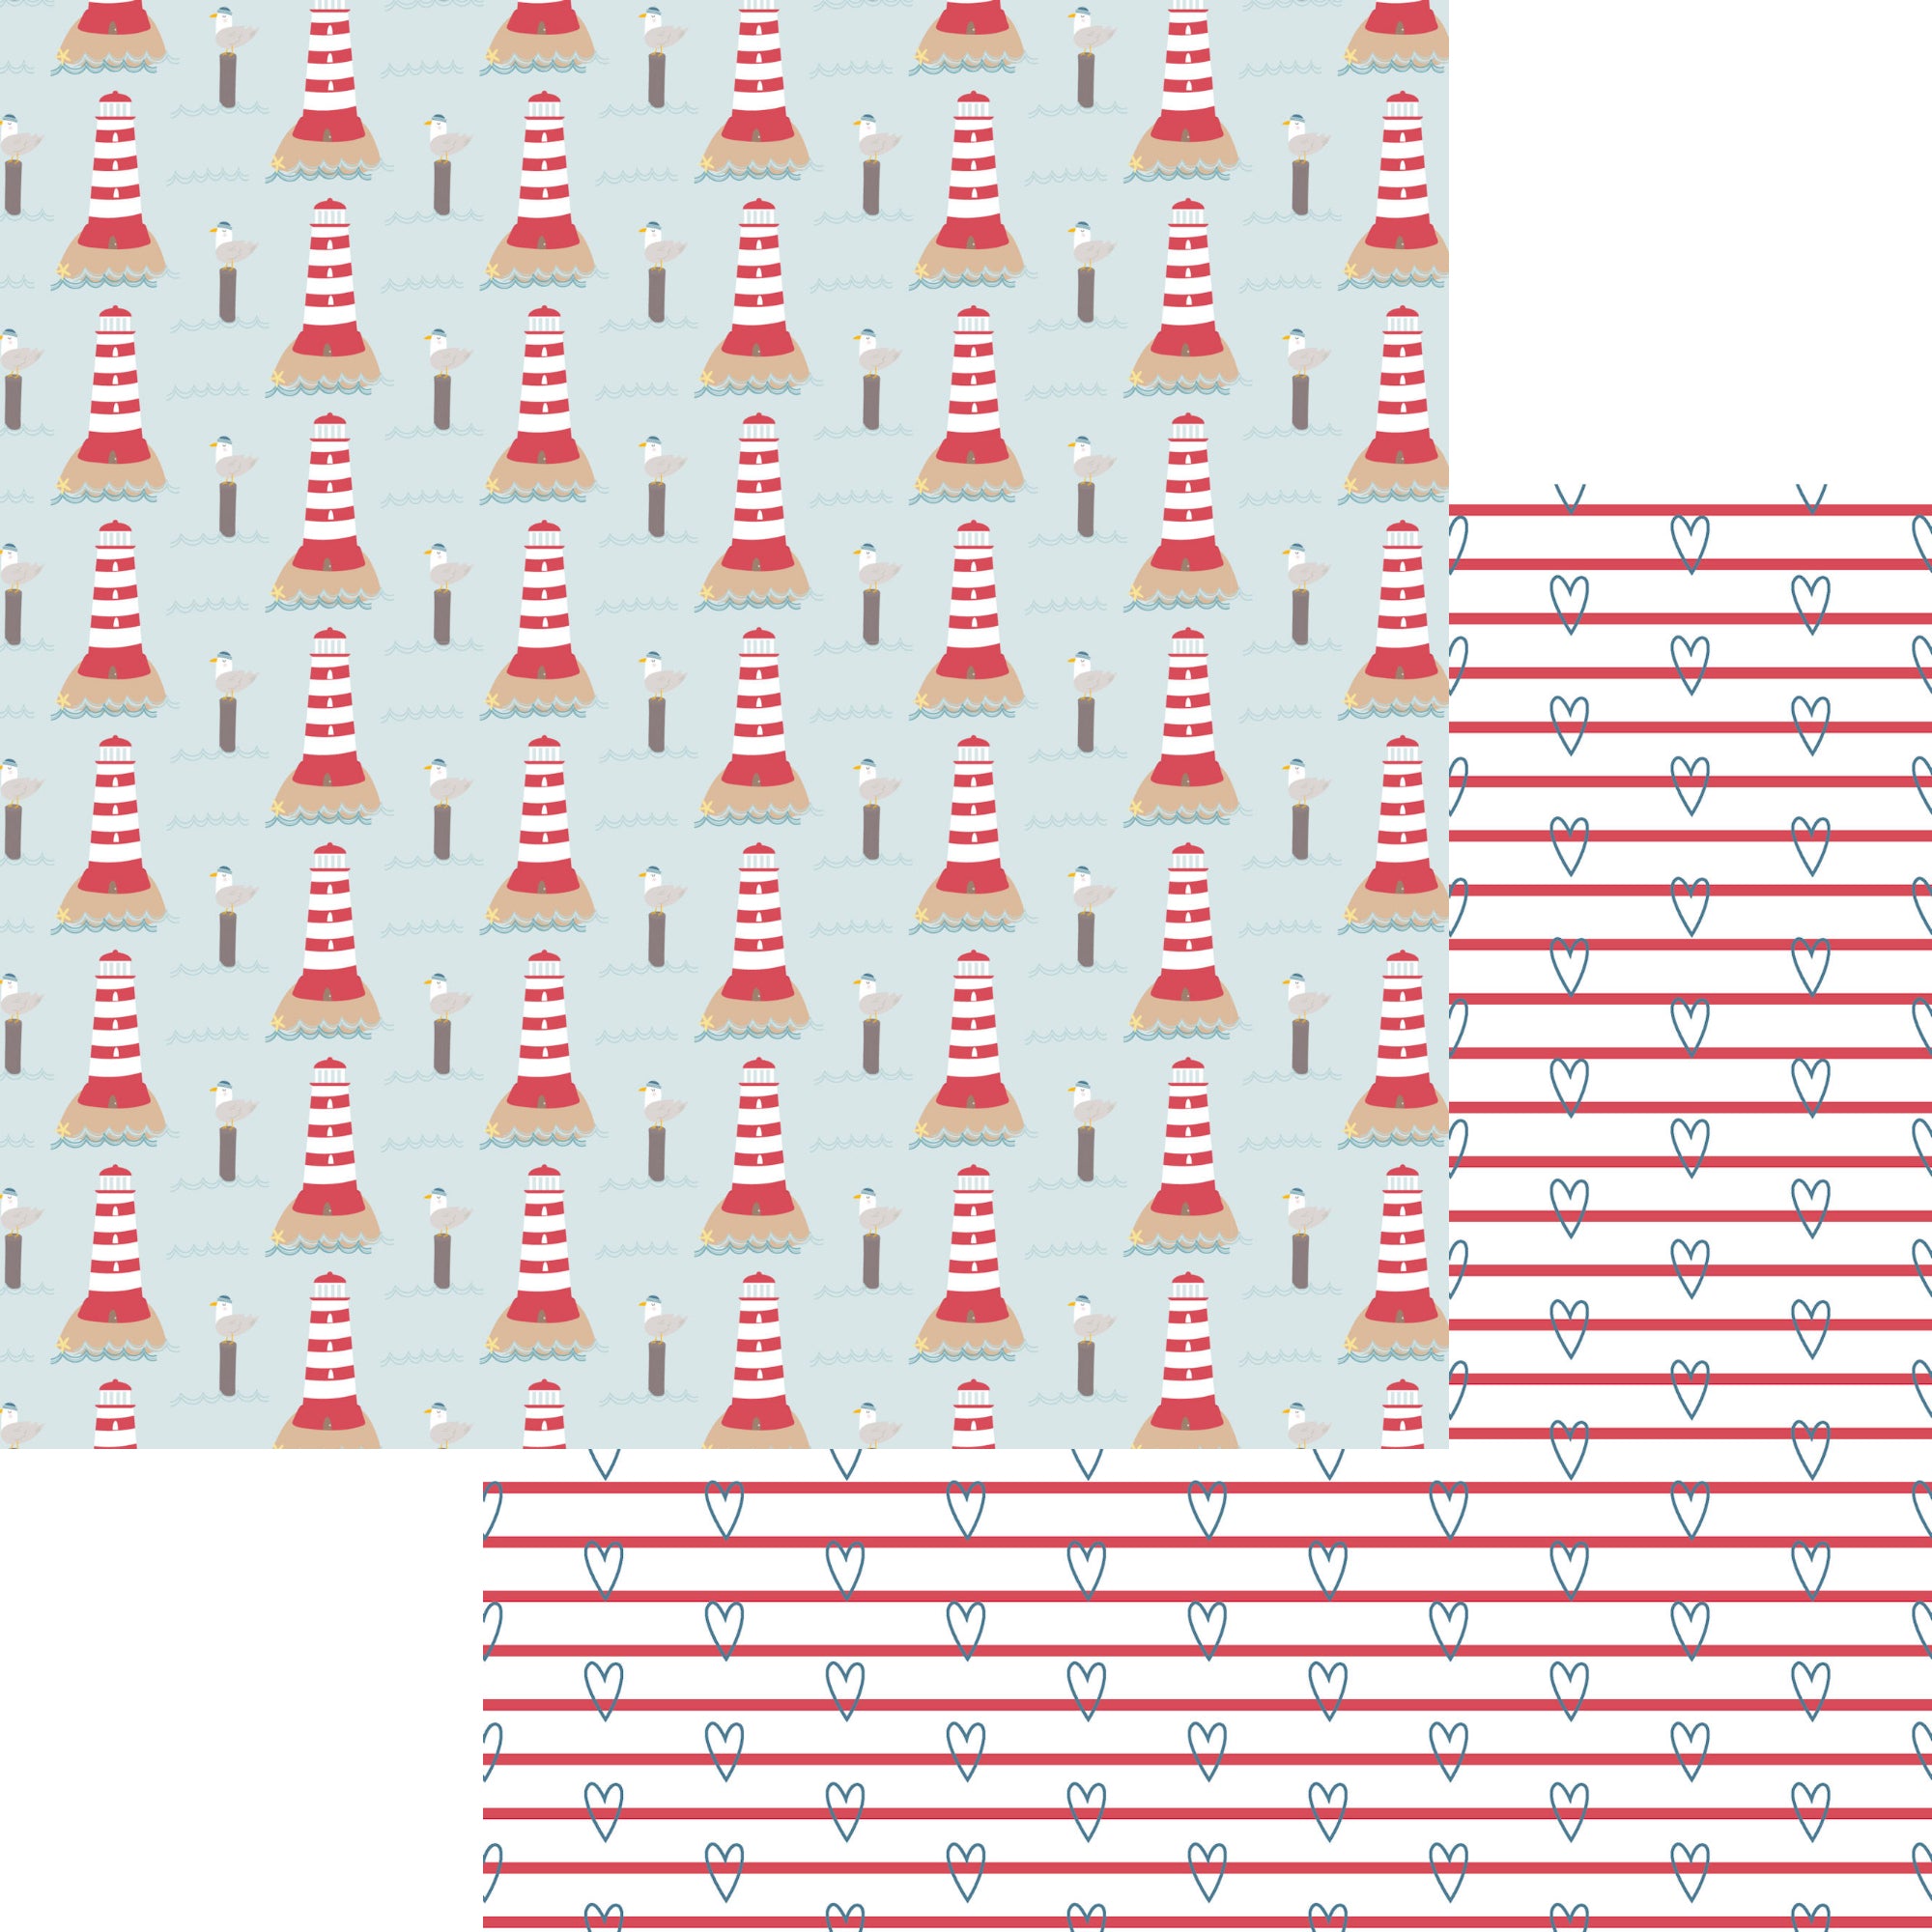 By The Sea Collection Lighthouse 12 x 12 Double-Sided Scrapbook Paper by SSC Designs